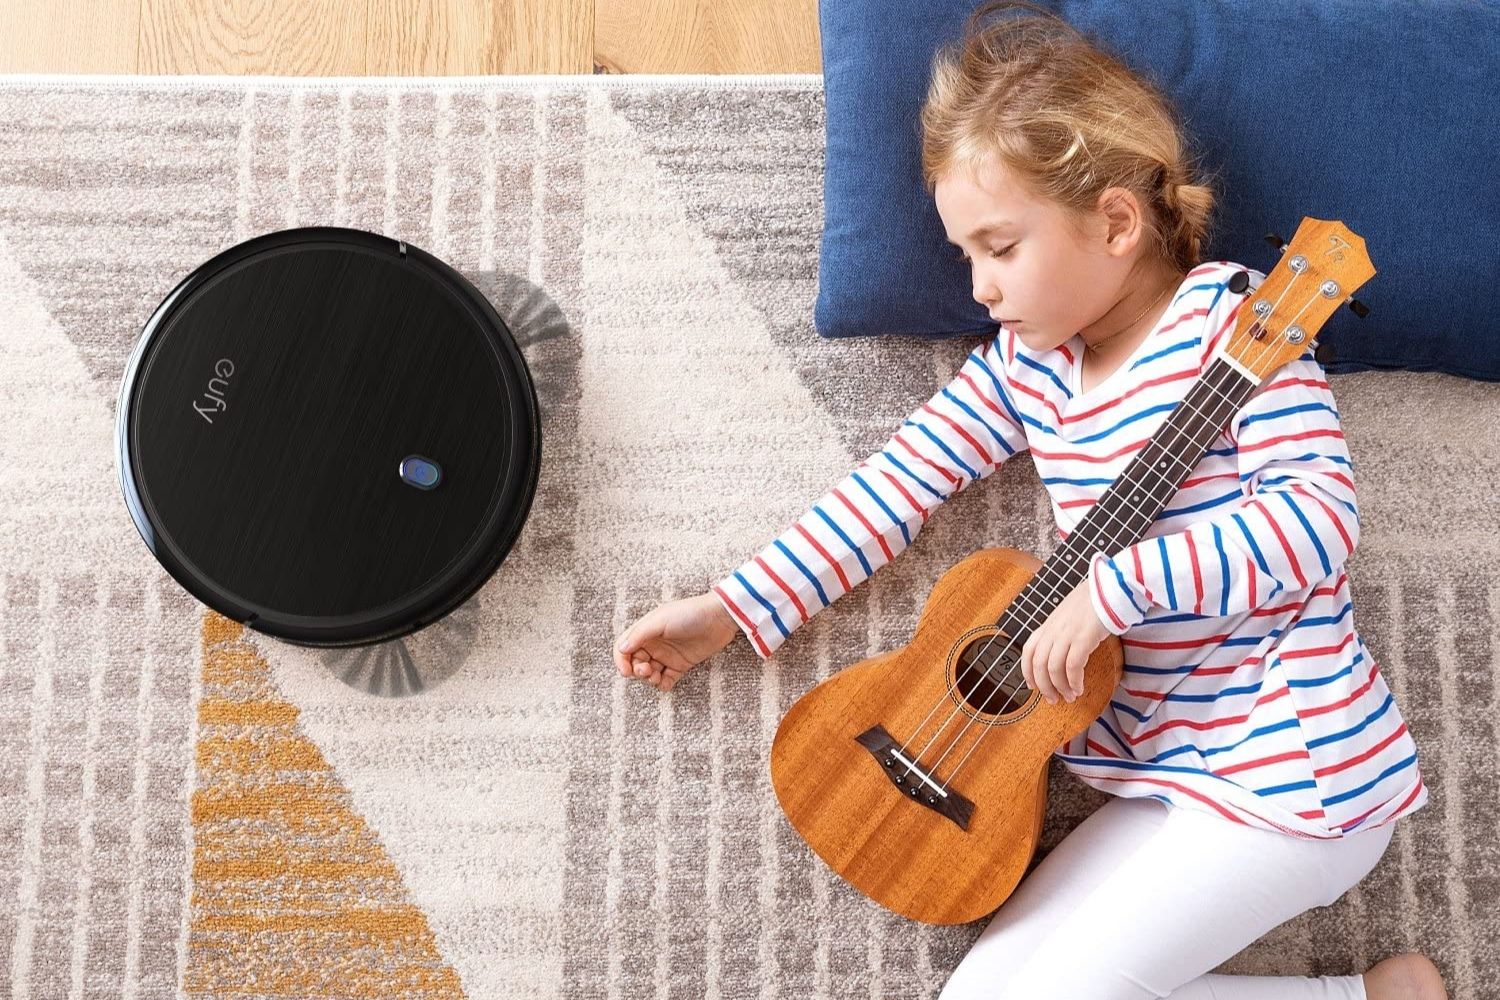 The Prime Day Roomba Option